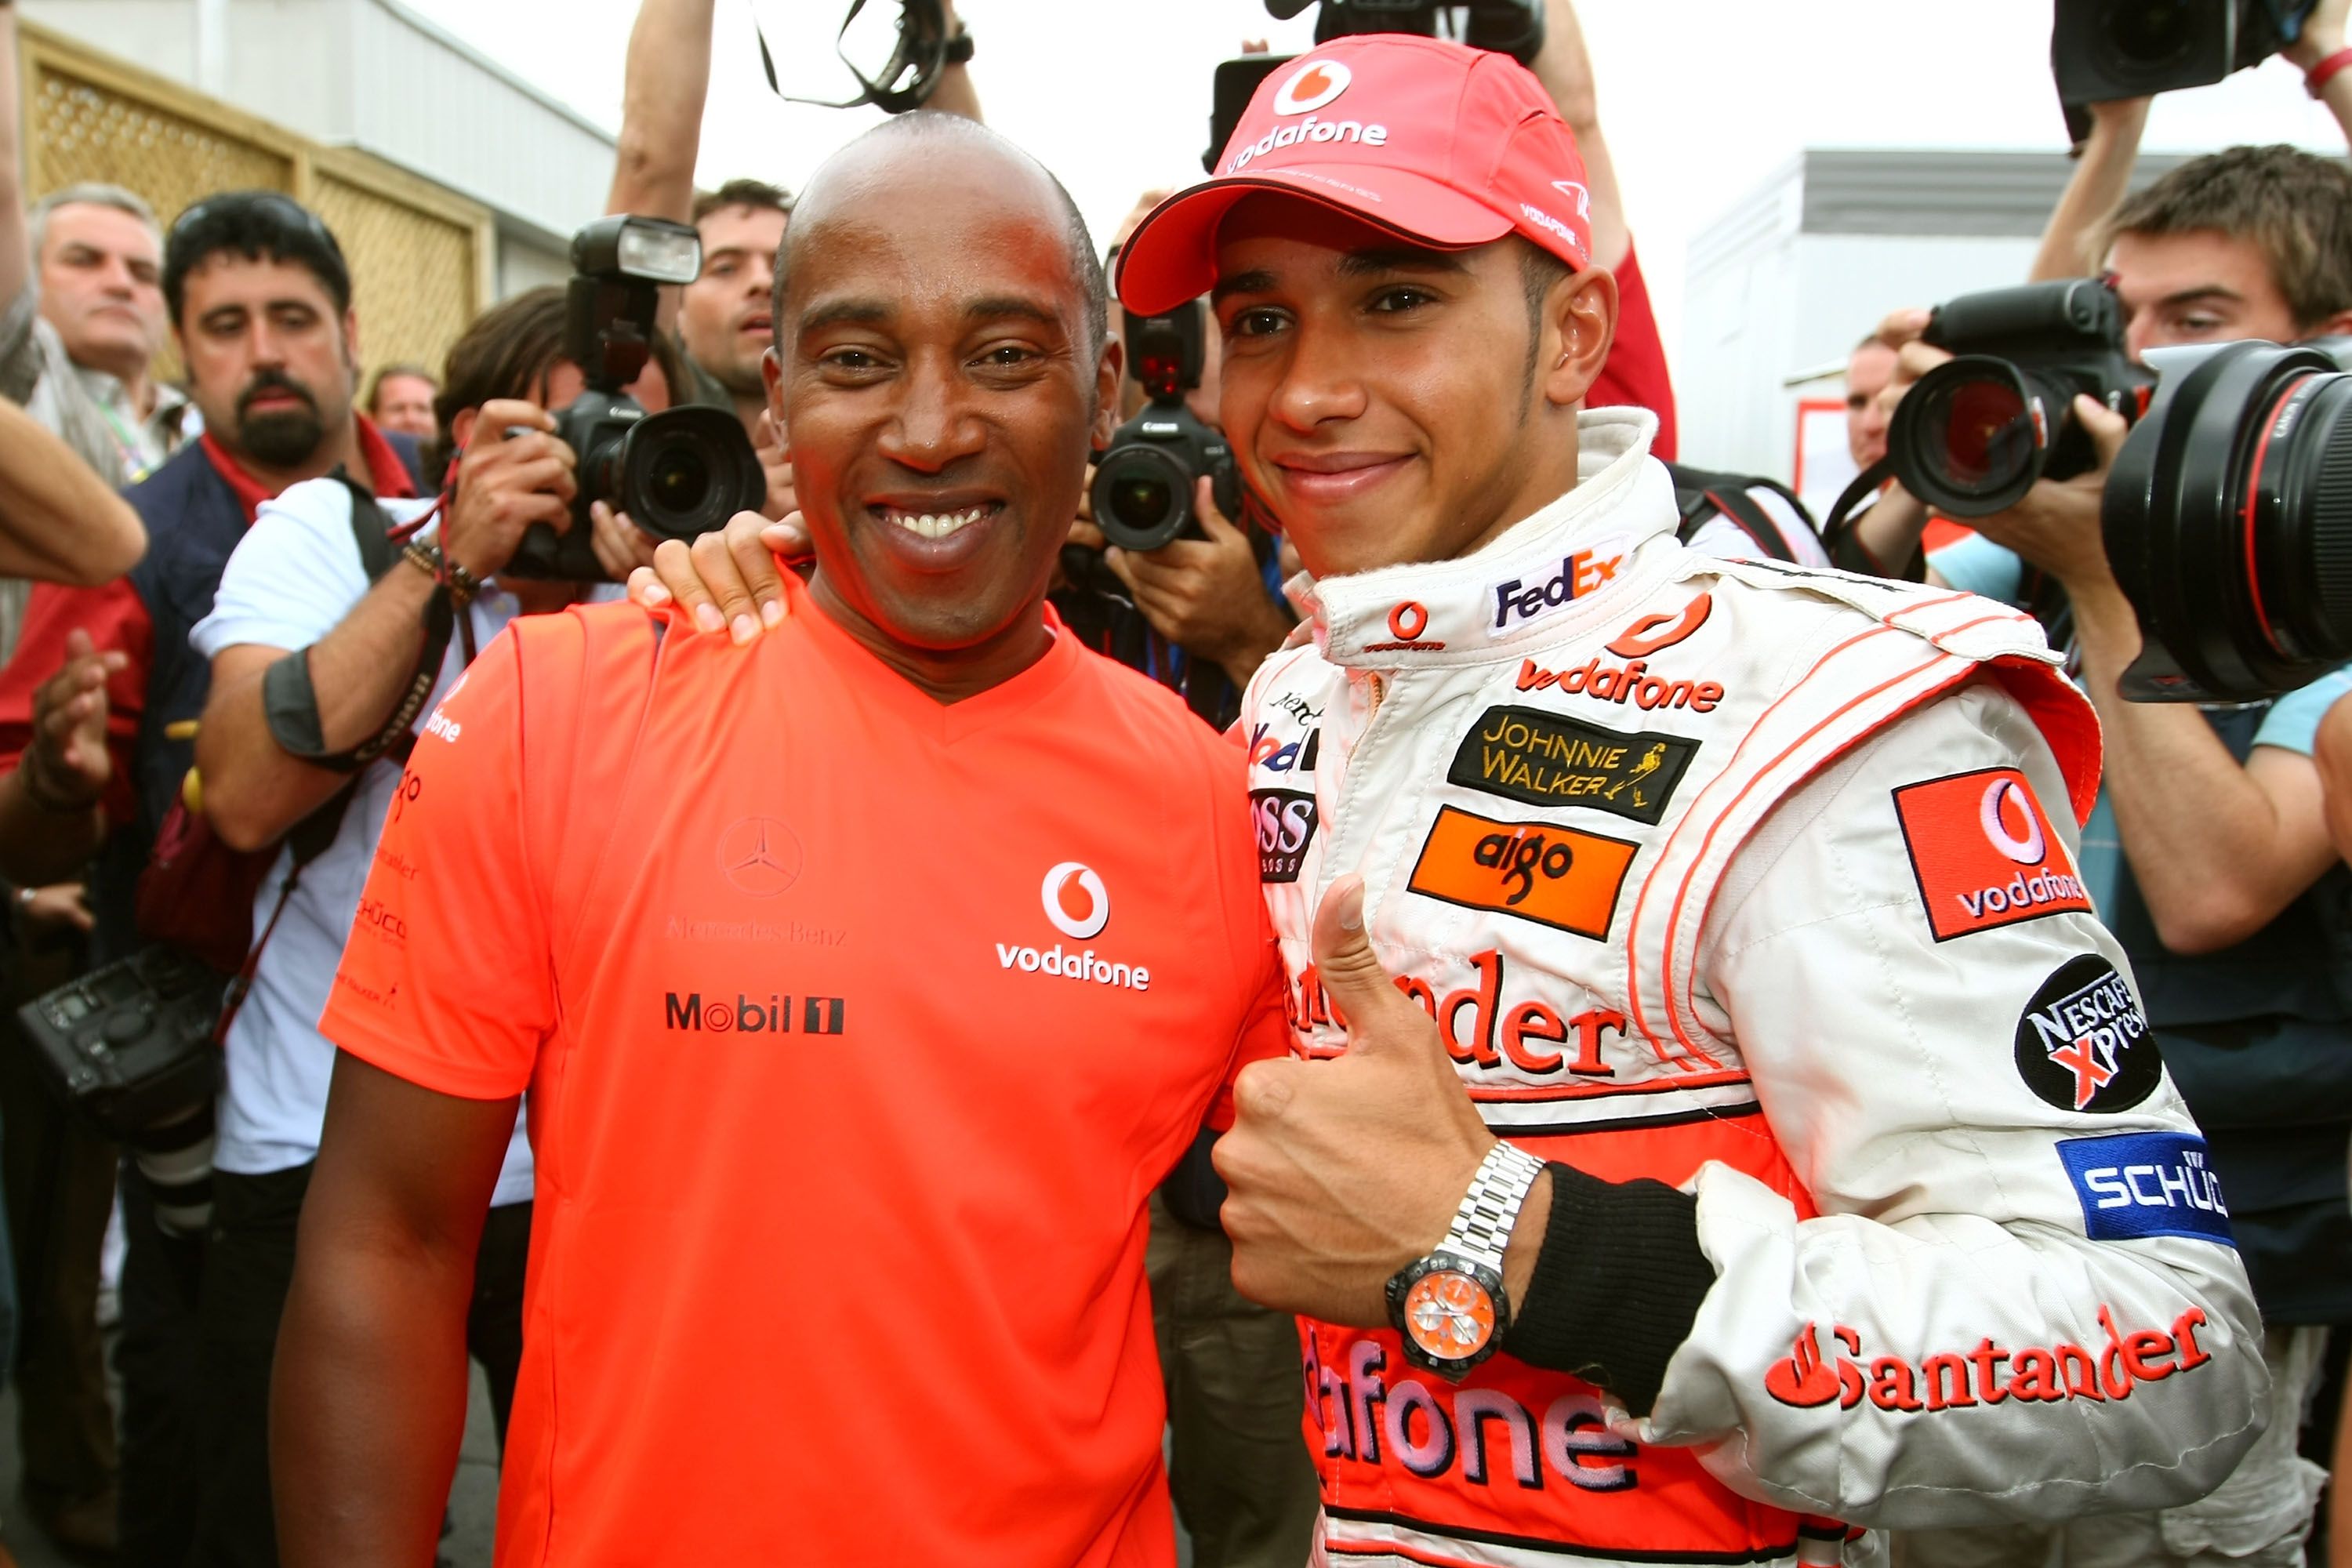 Lewis Hamilton of Great Britain and McLaren Mercedes celebrates with his father Anthony Hamilton in the paddock after winning his first Grand Prix in the Canadian Formula One Grand Prix at the Circuit Gilles Villeneuve on June 10, 2007 | Photo: Getty Images